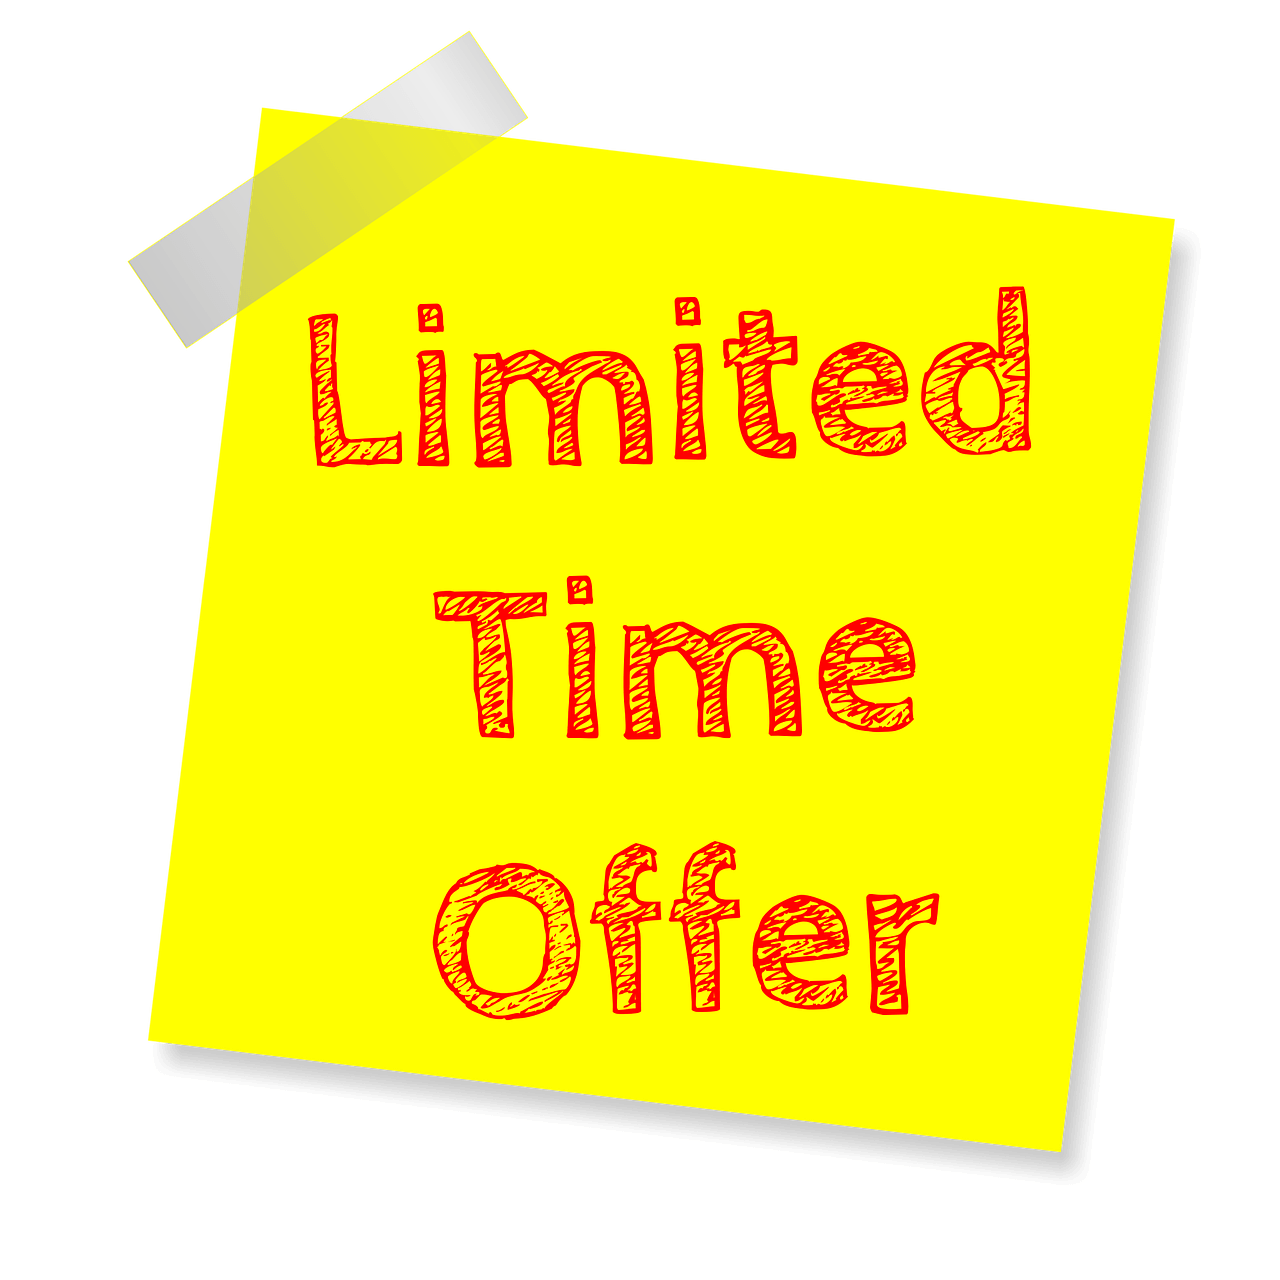 By having limited time offers, customers will buy more